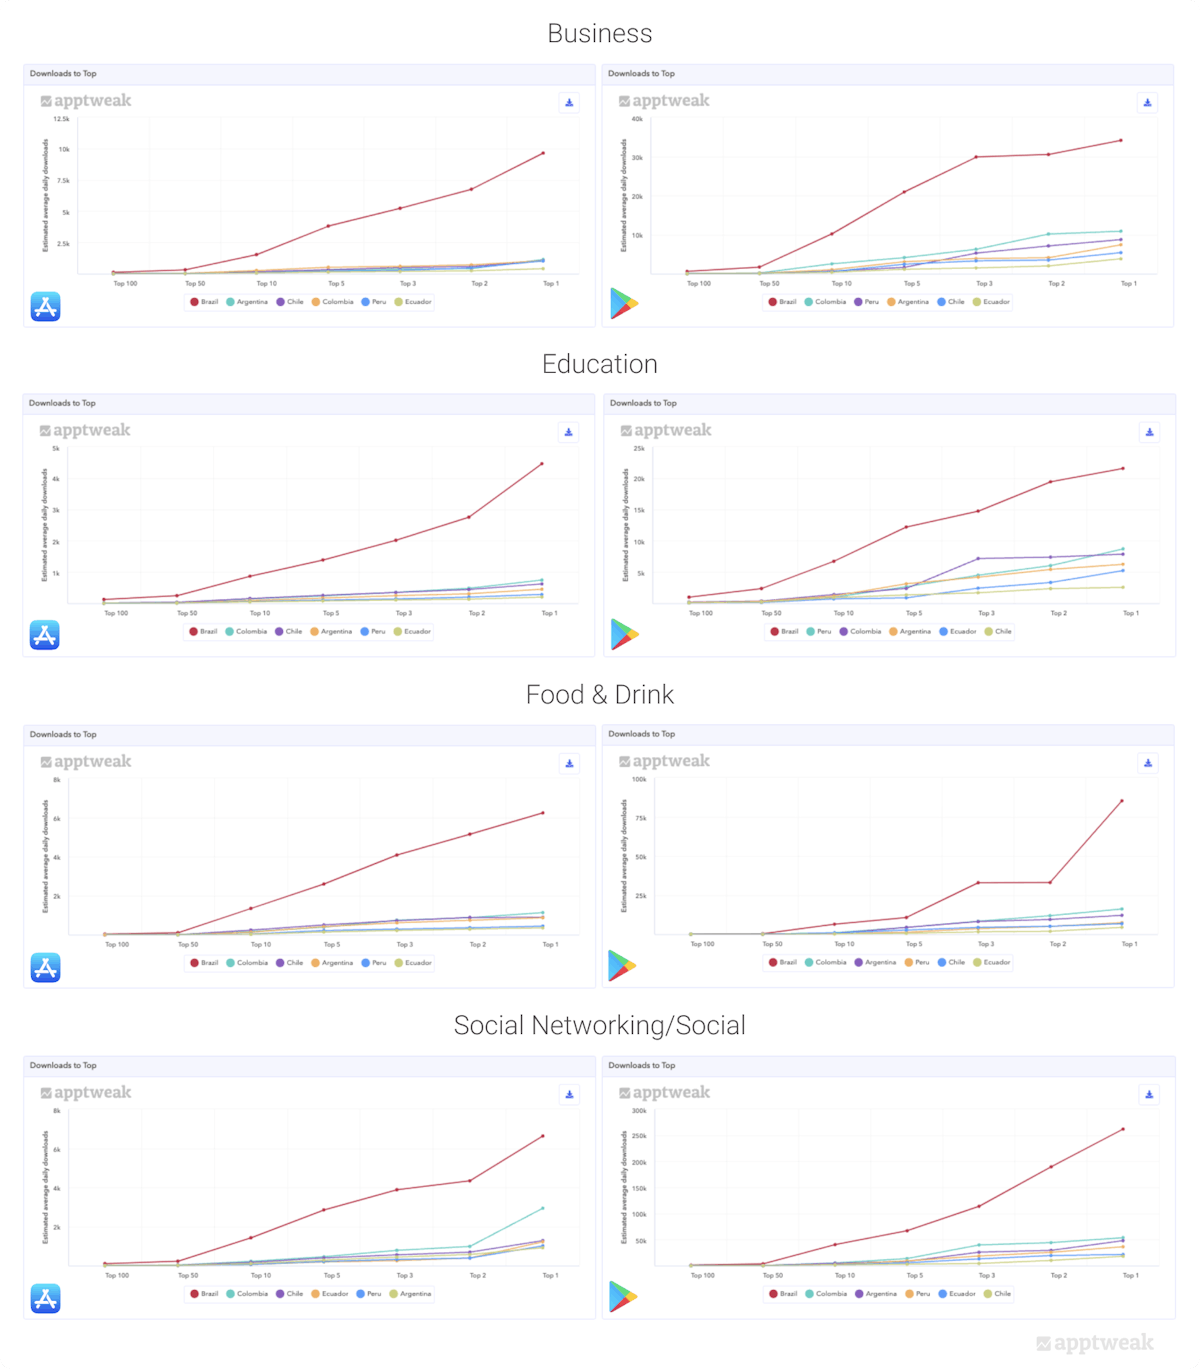 Comparing the number of daily downloads an app needs to reach the top charts of several categories on the App Store and Google Play in major South American countries